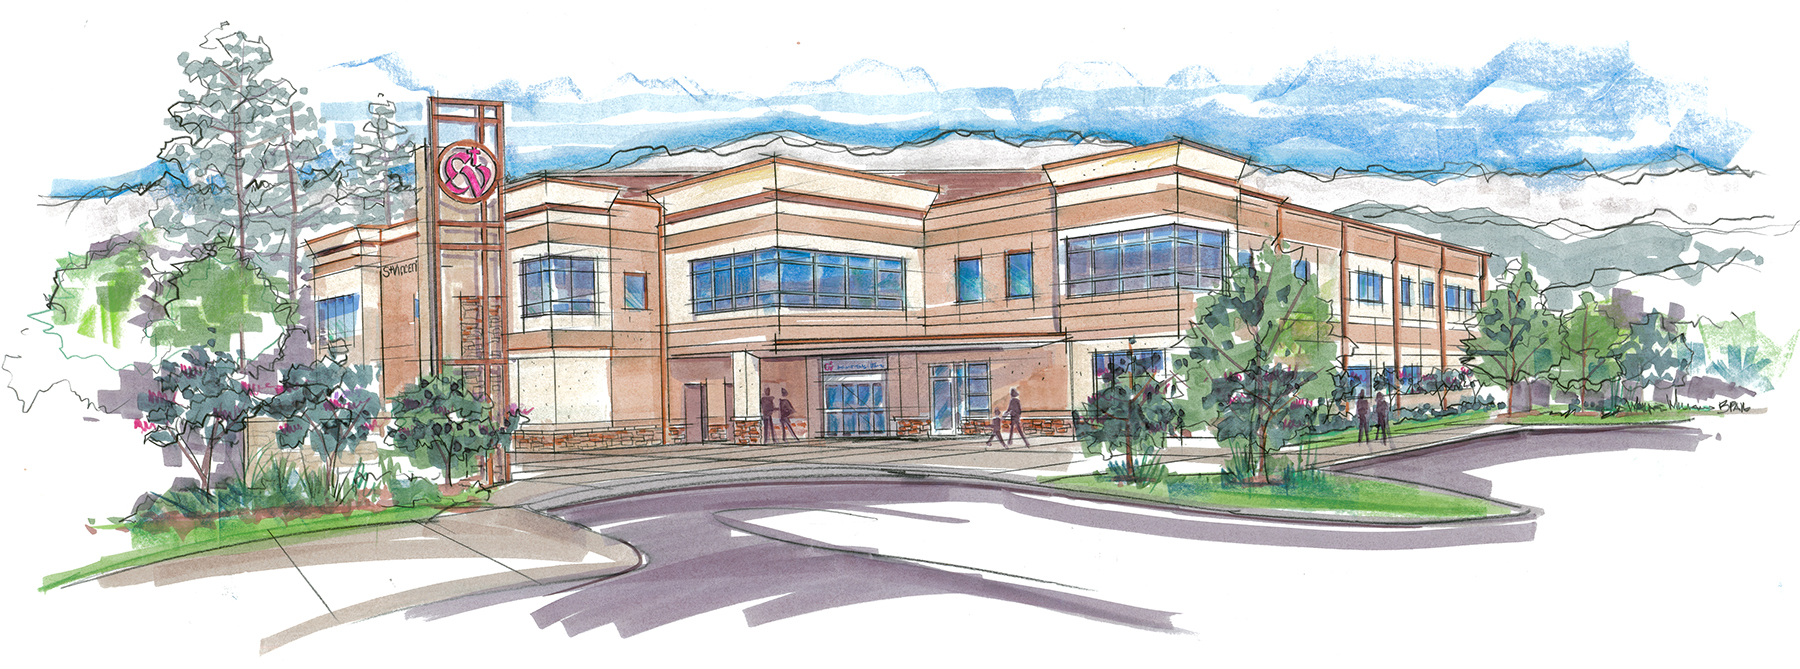 St. Vincent's to locate outpatient services and more at new facility to be built in Trussville